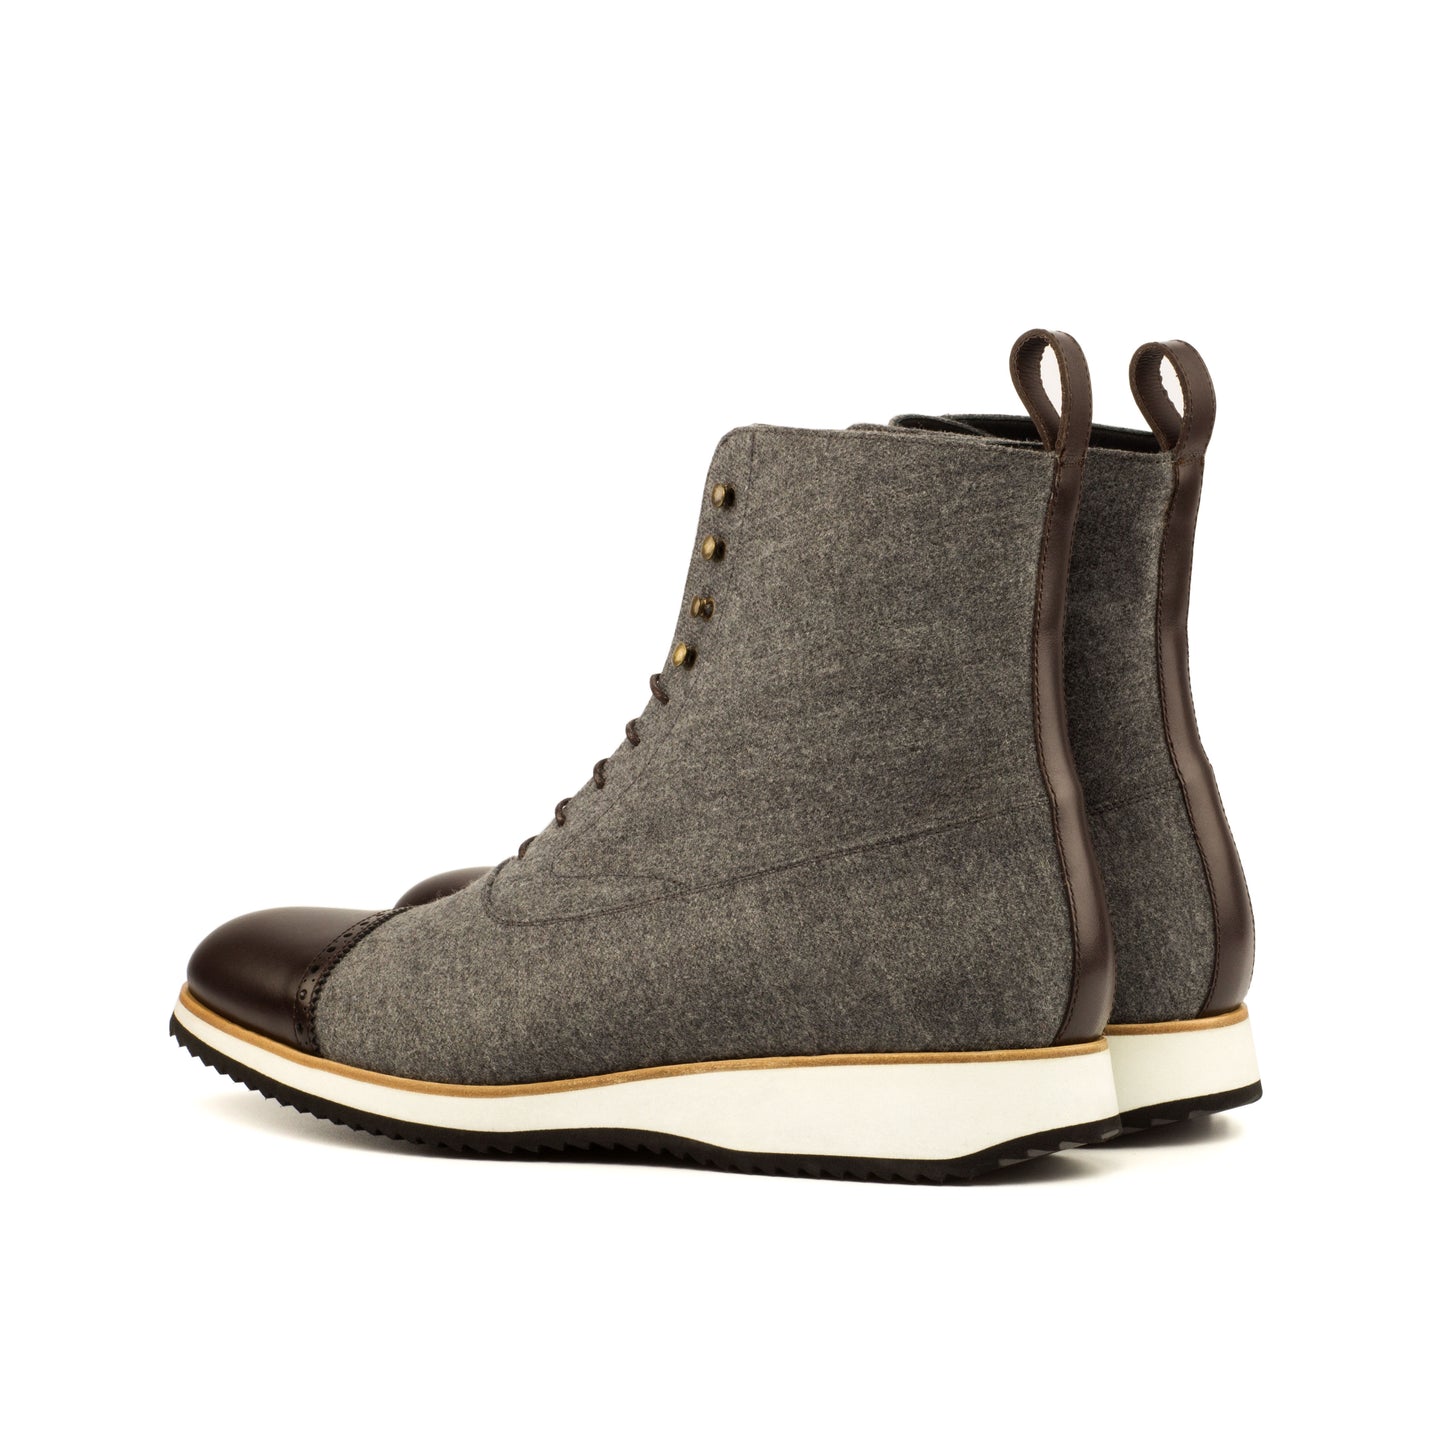 SUITCAFE Balmoral Men's Boot Grey Flannel & Brown Leather